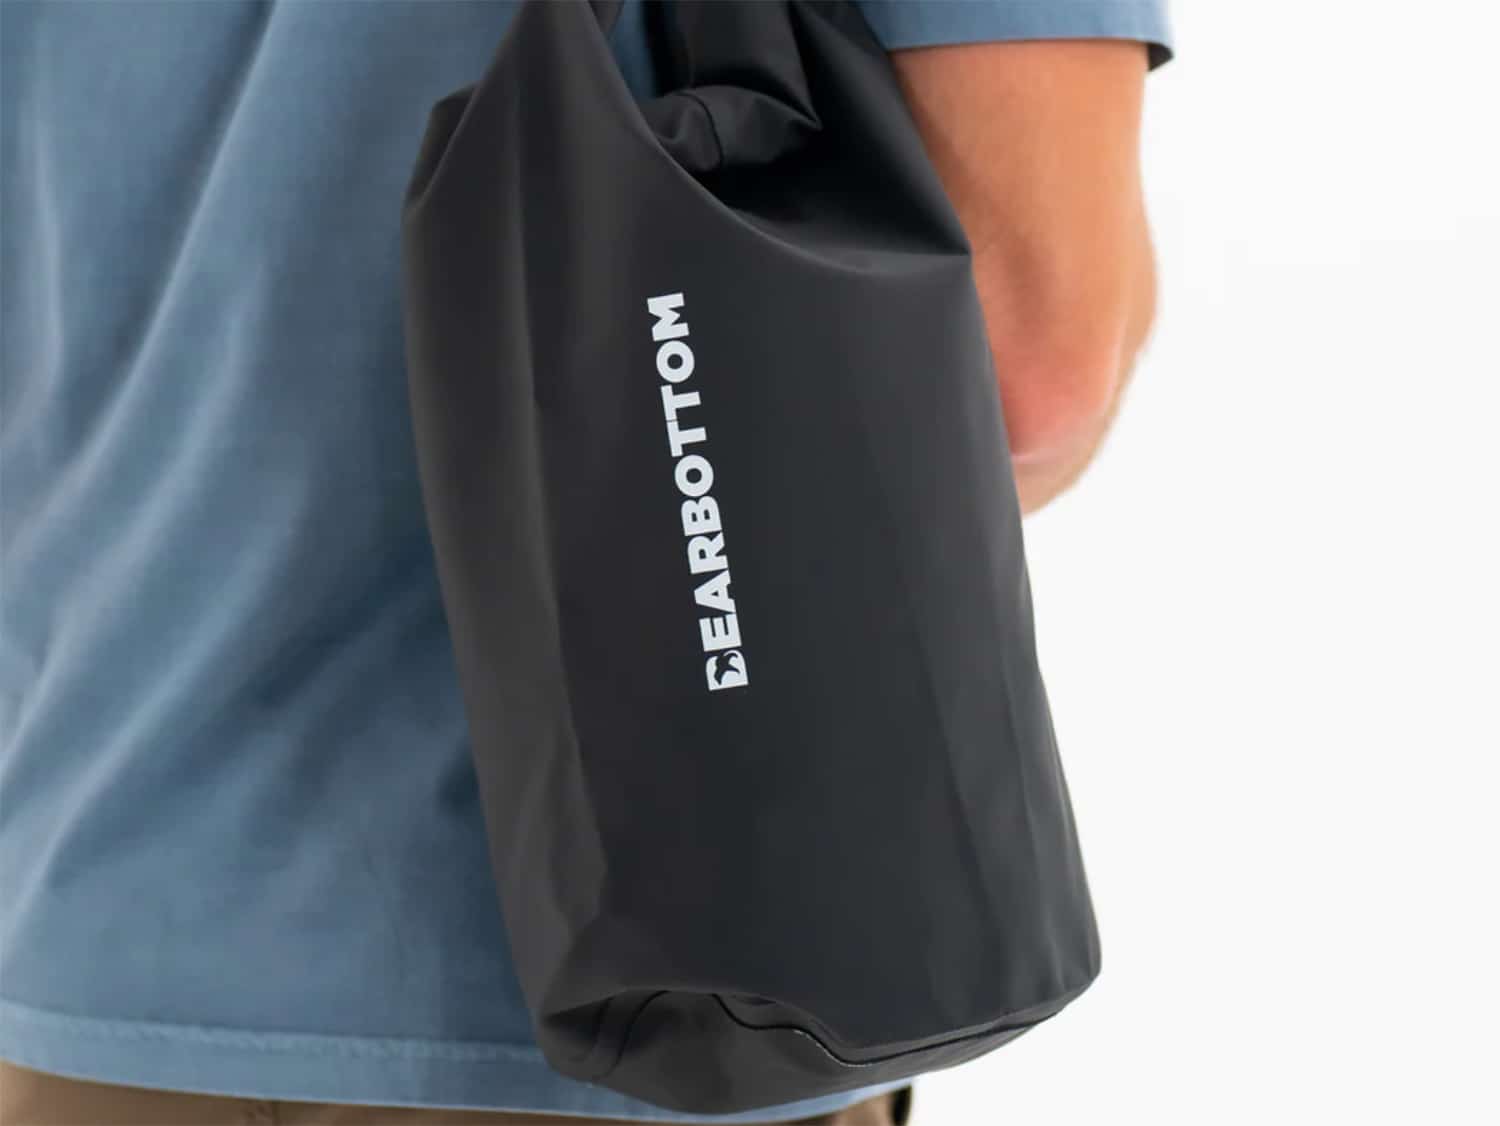 A man carrying the Bearbottom Rapids Dry Bag 10L.